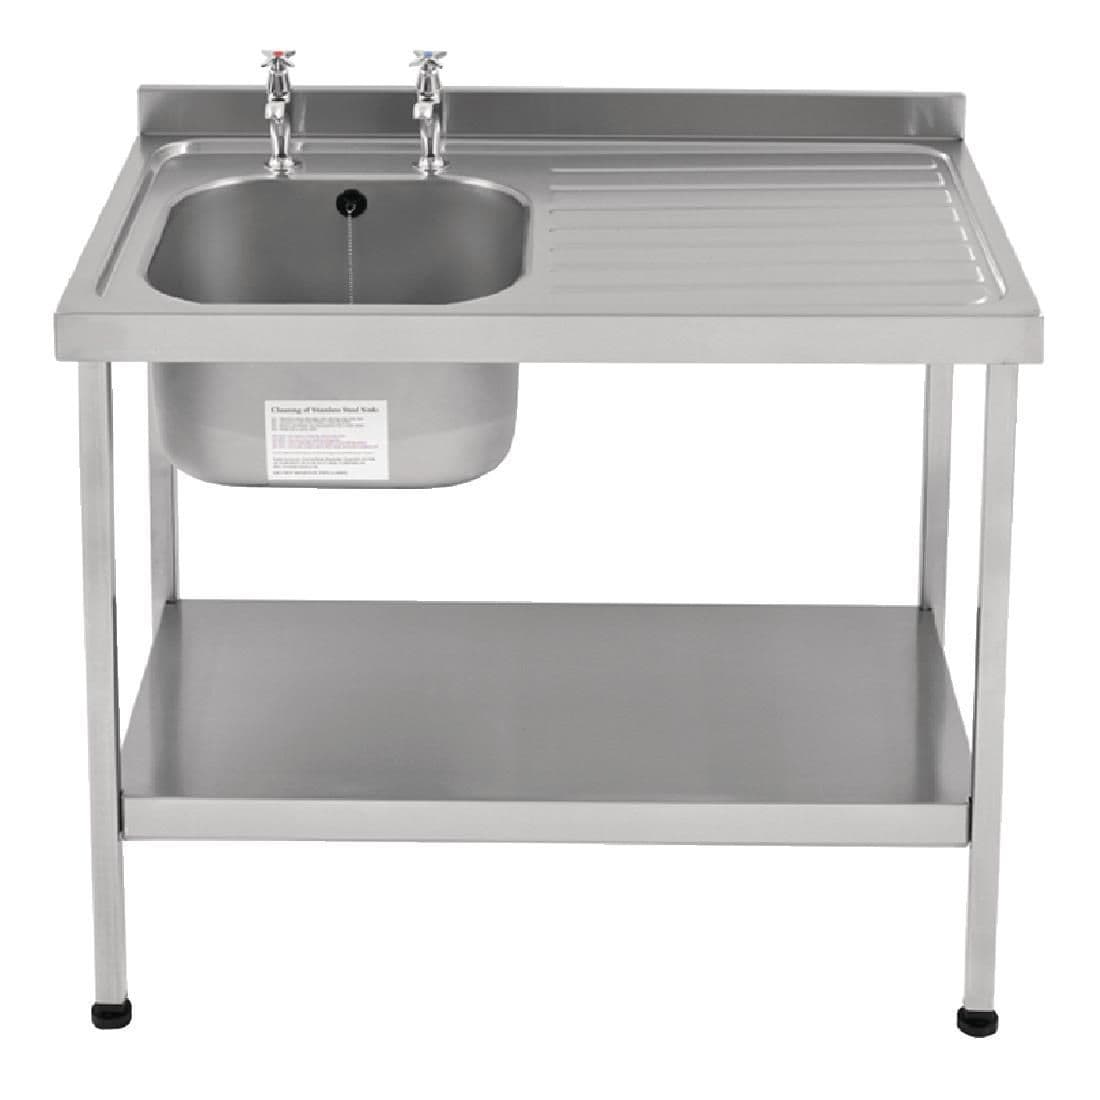 Franke Sissons Self Assembly Stainless Steel Sink Right Hand Drainer 1000x600mm JD Catering Equipment Solutions Ltd